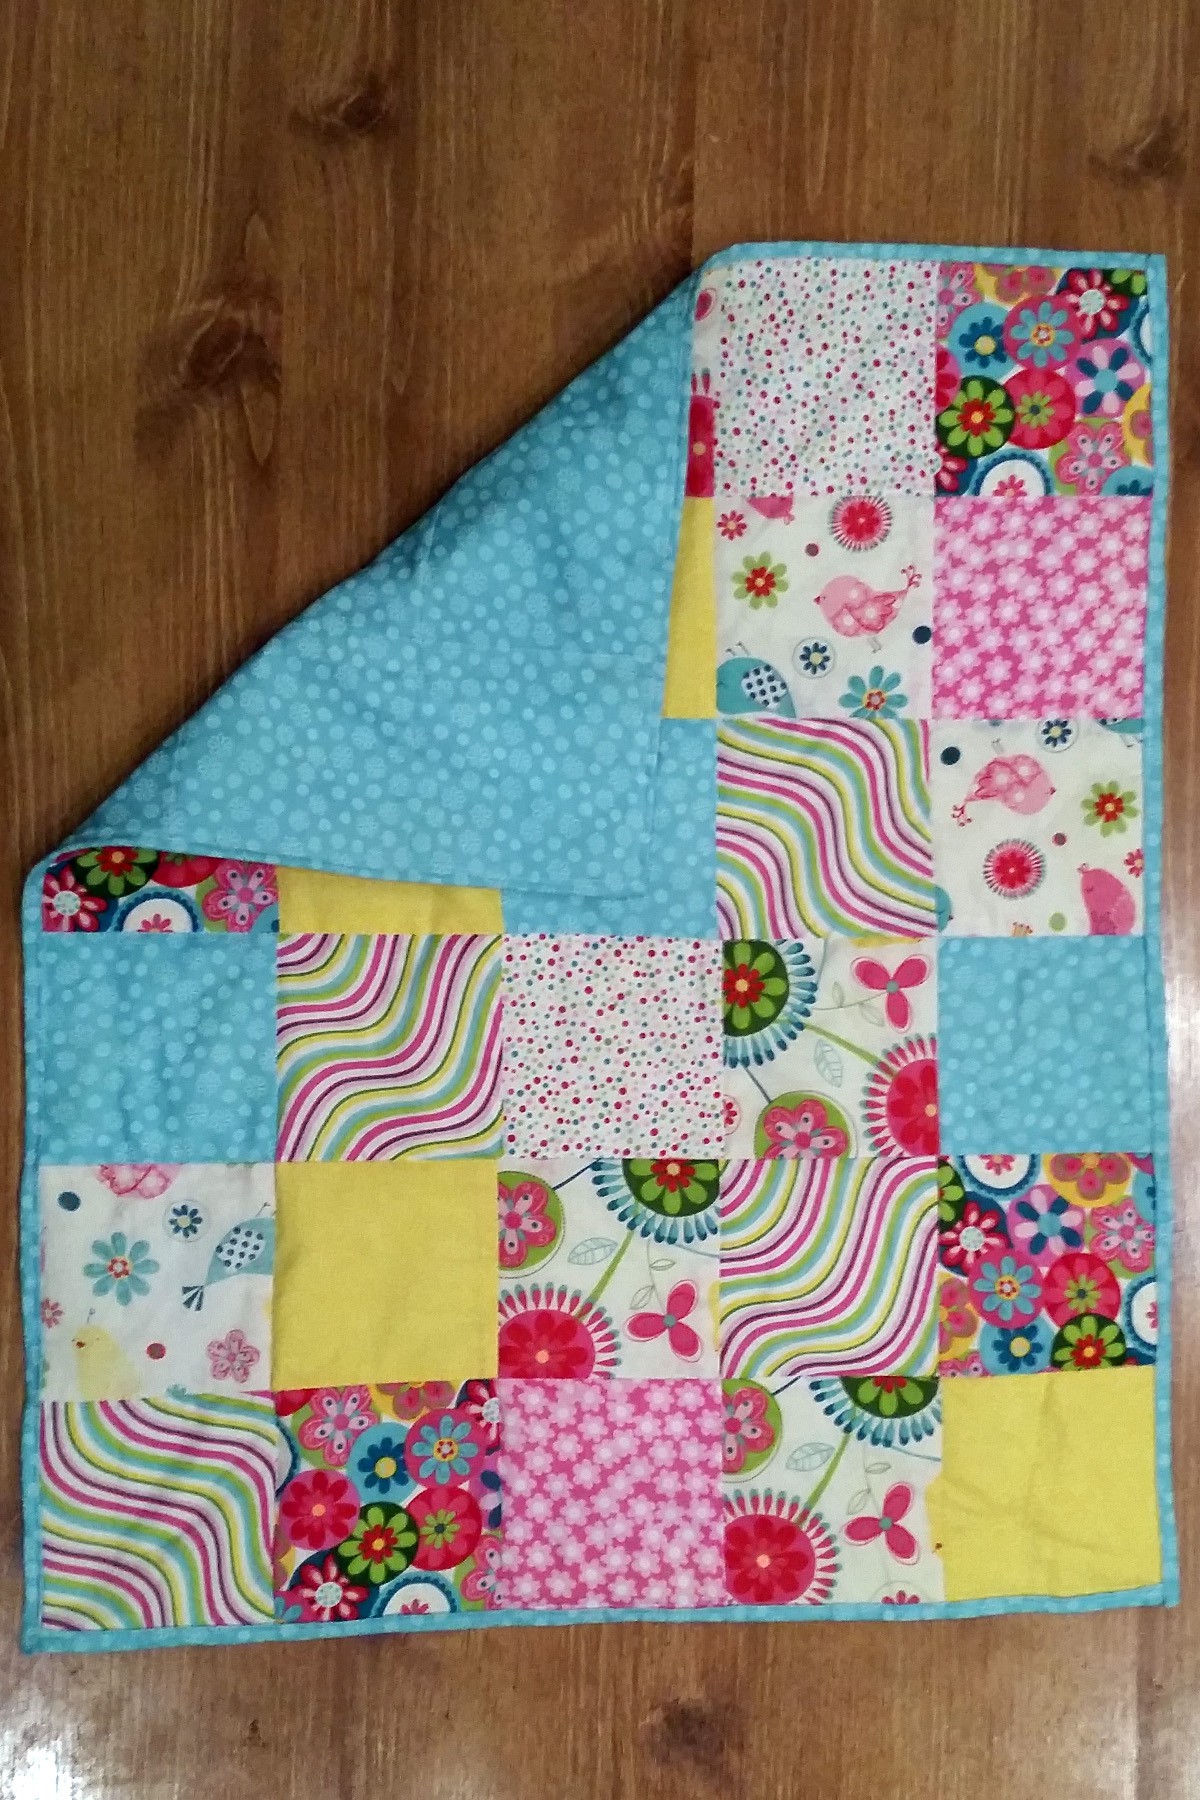 Pip the Pup's Charm Pack Quilt